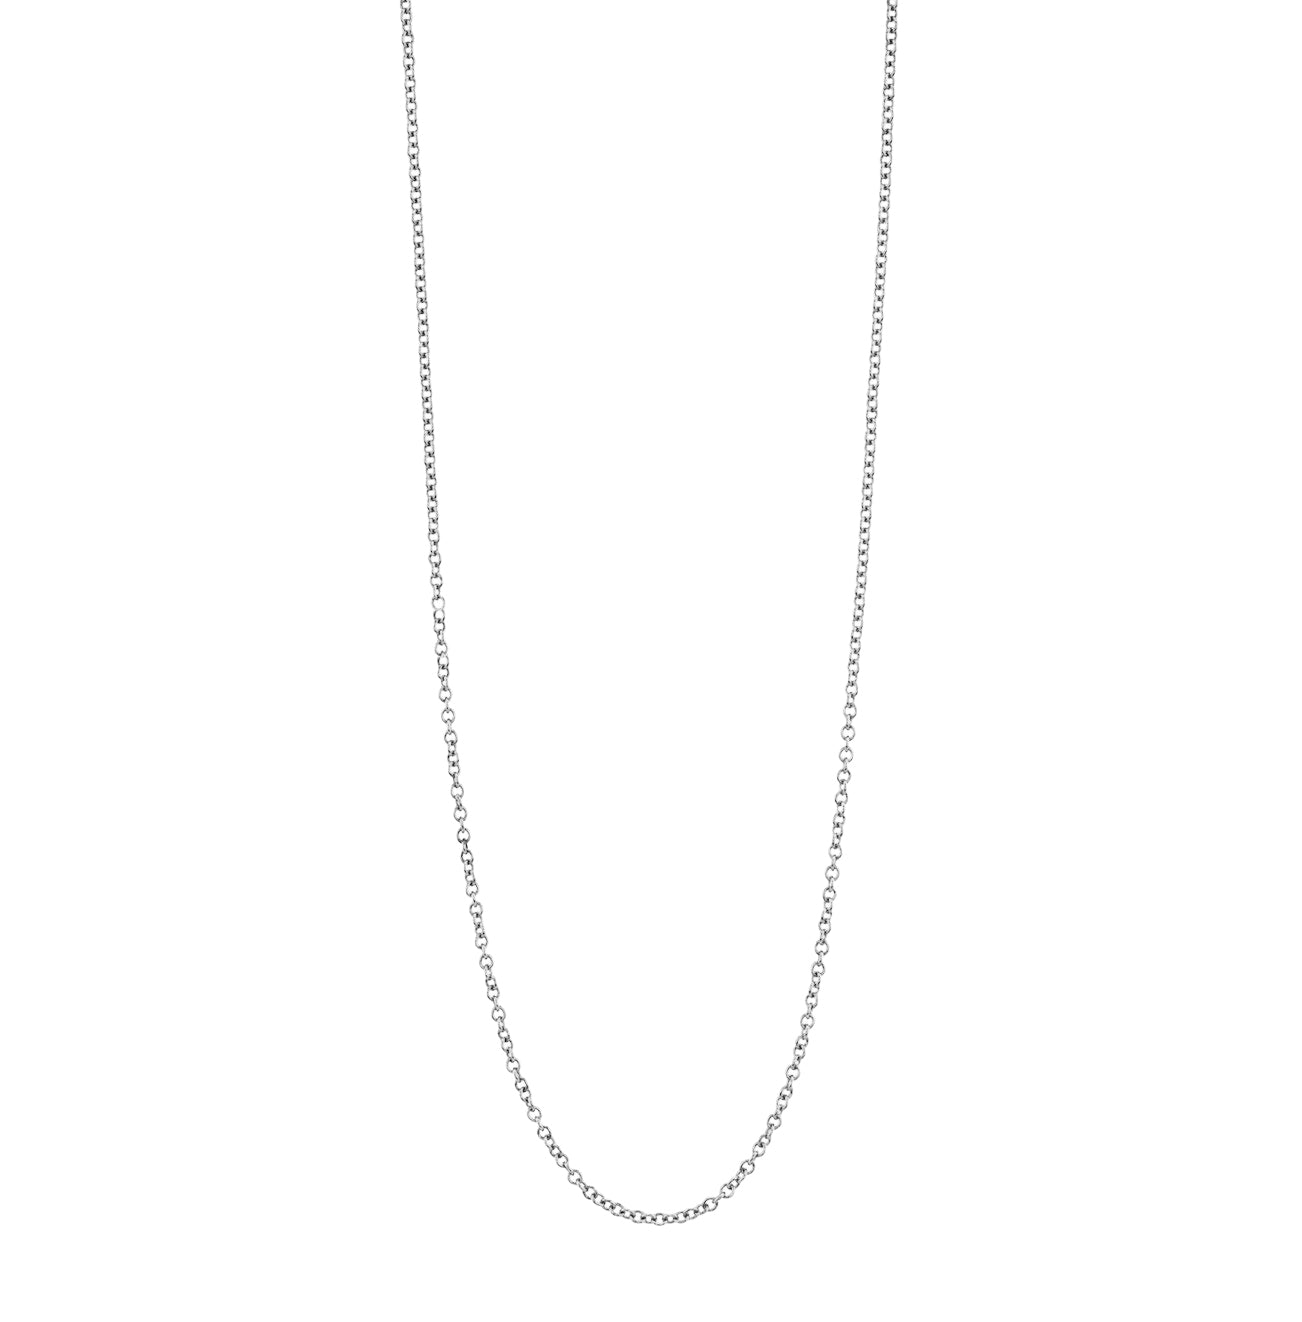 THIN CABLE CHAIN NECKLACE